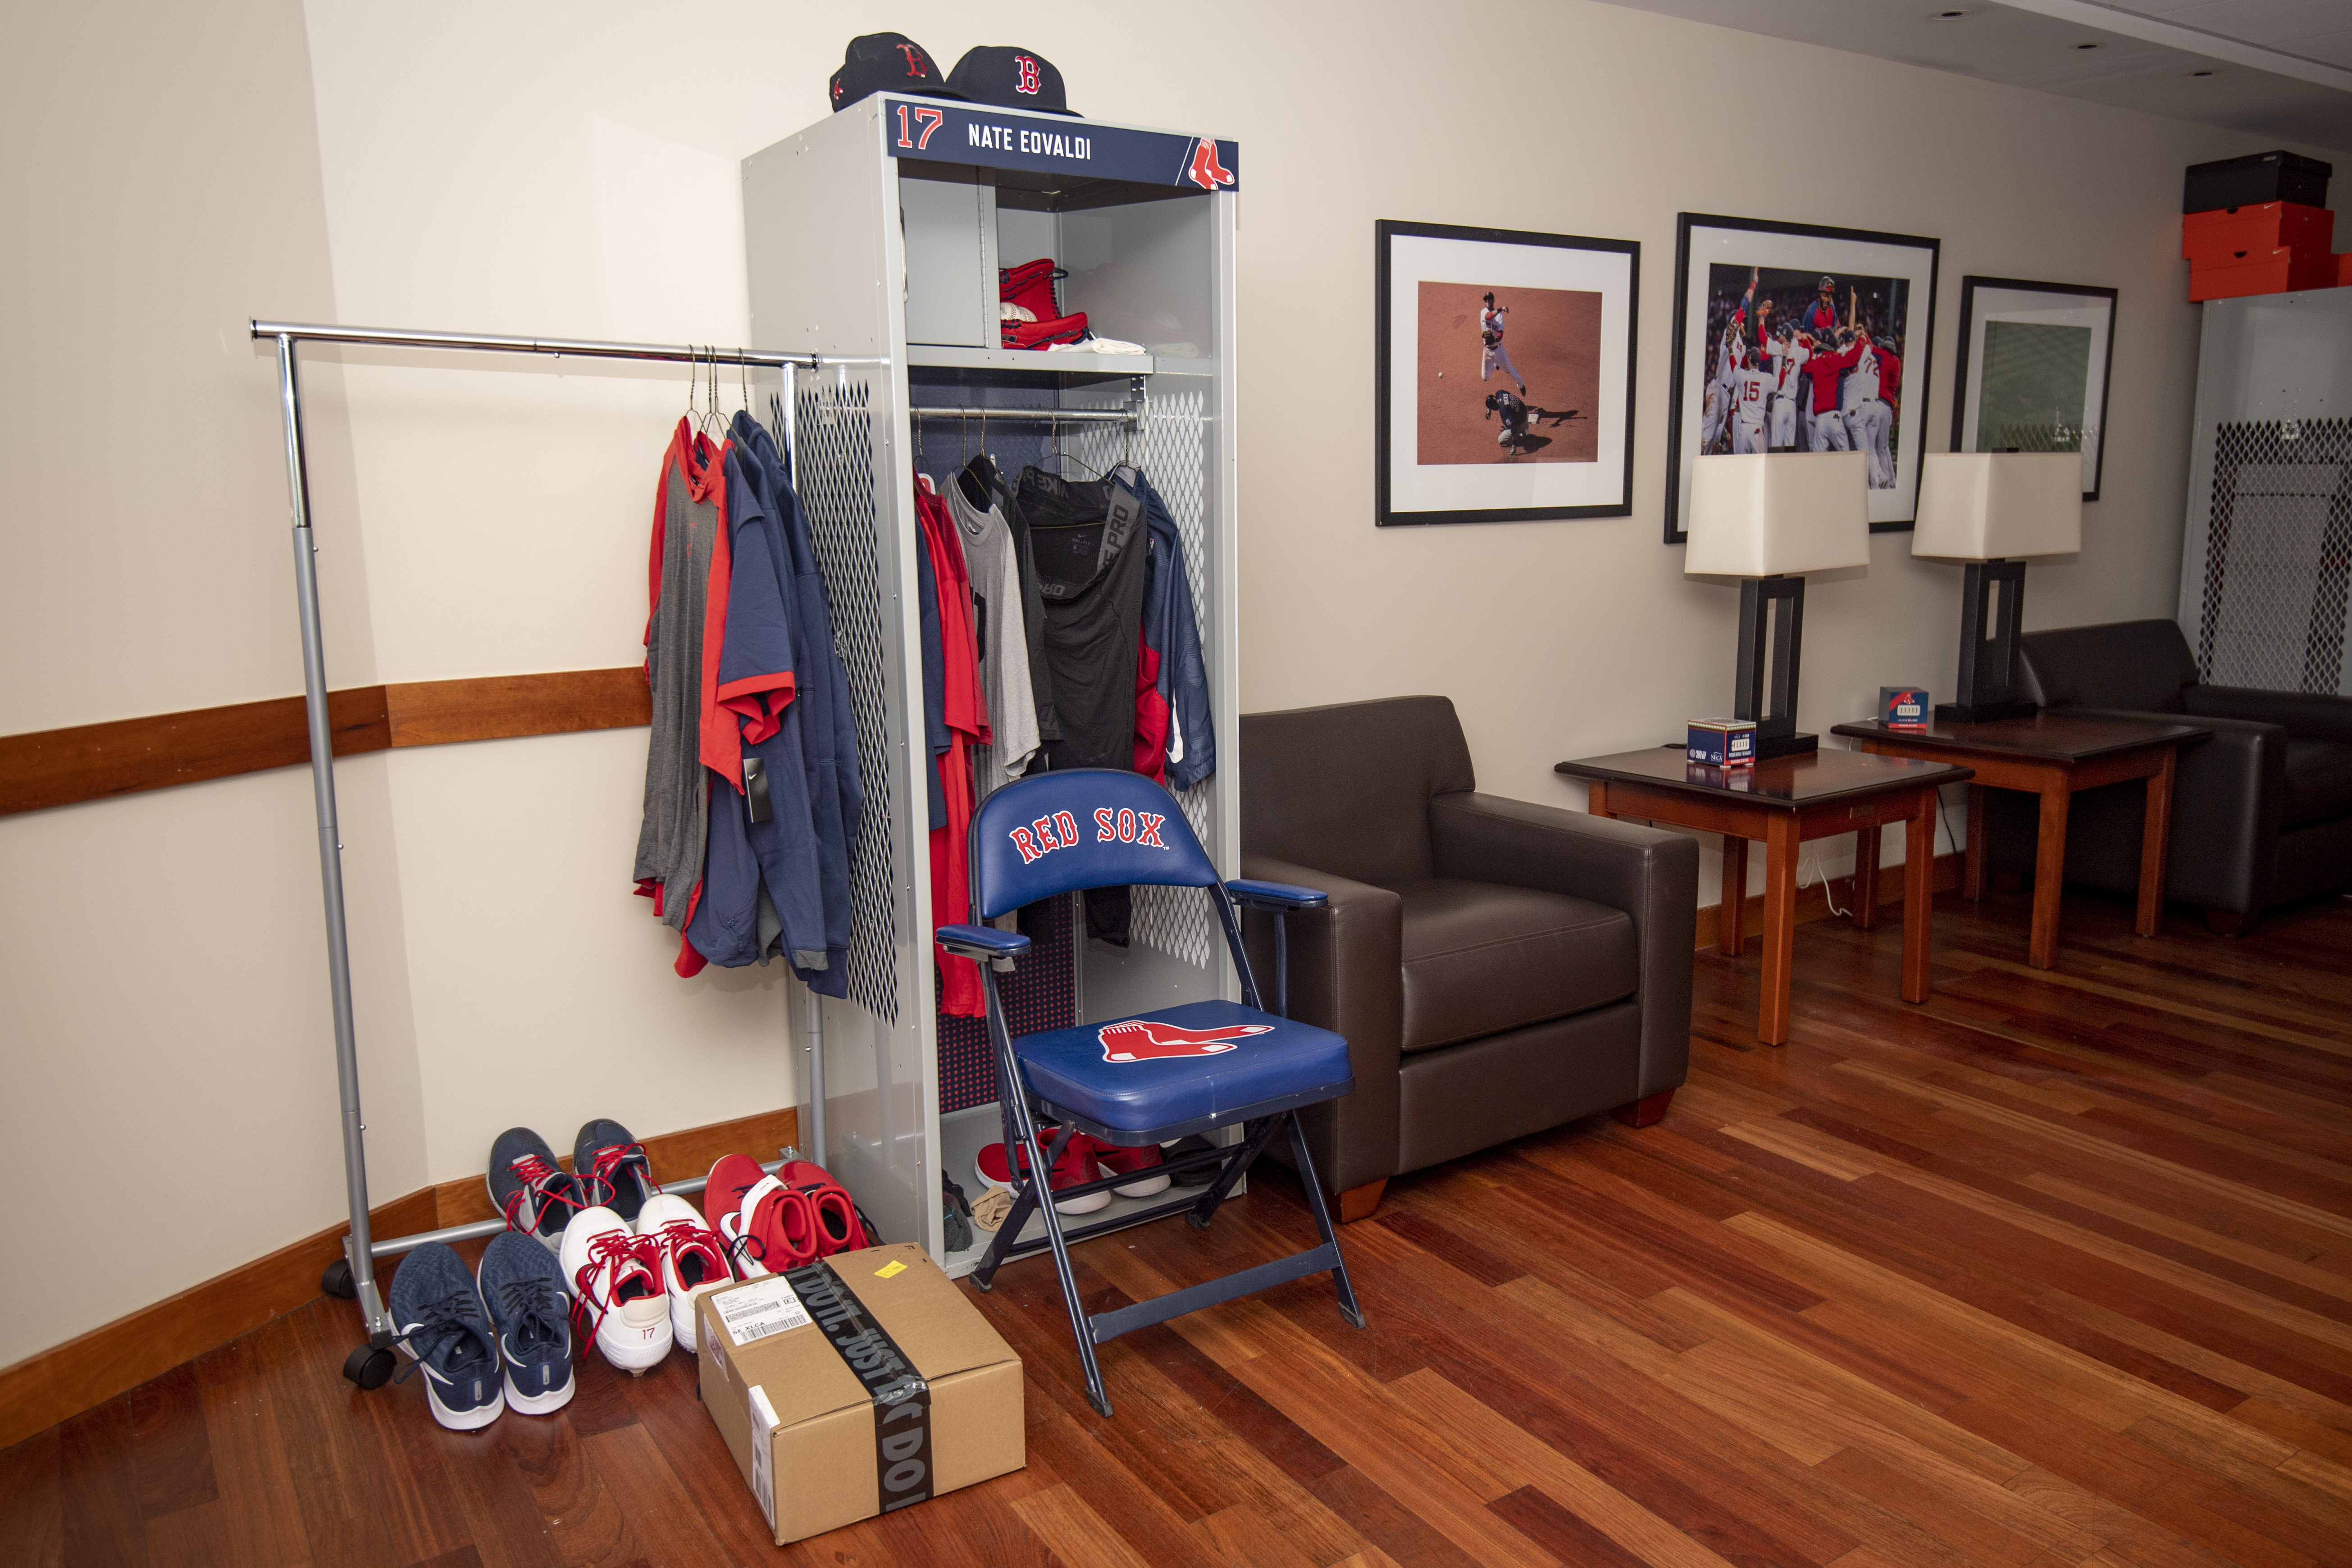 A peek inside the new Clubhouse at Fenway : r/baseball